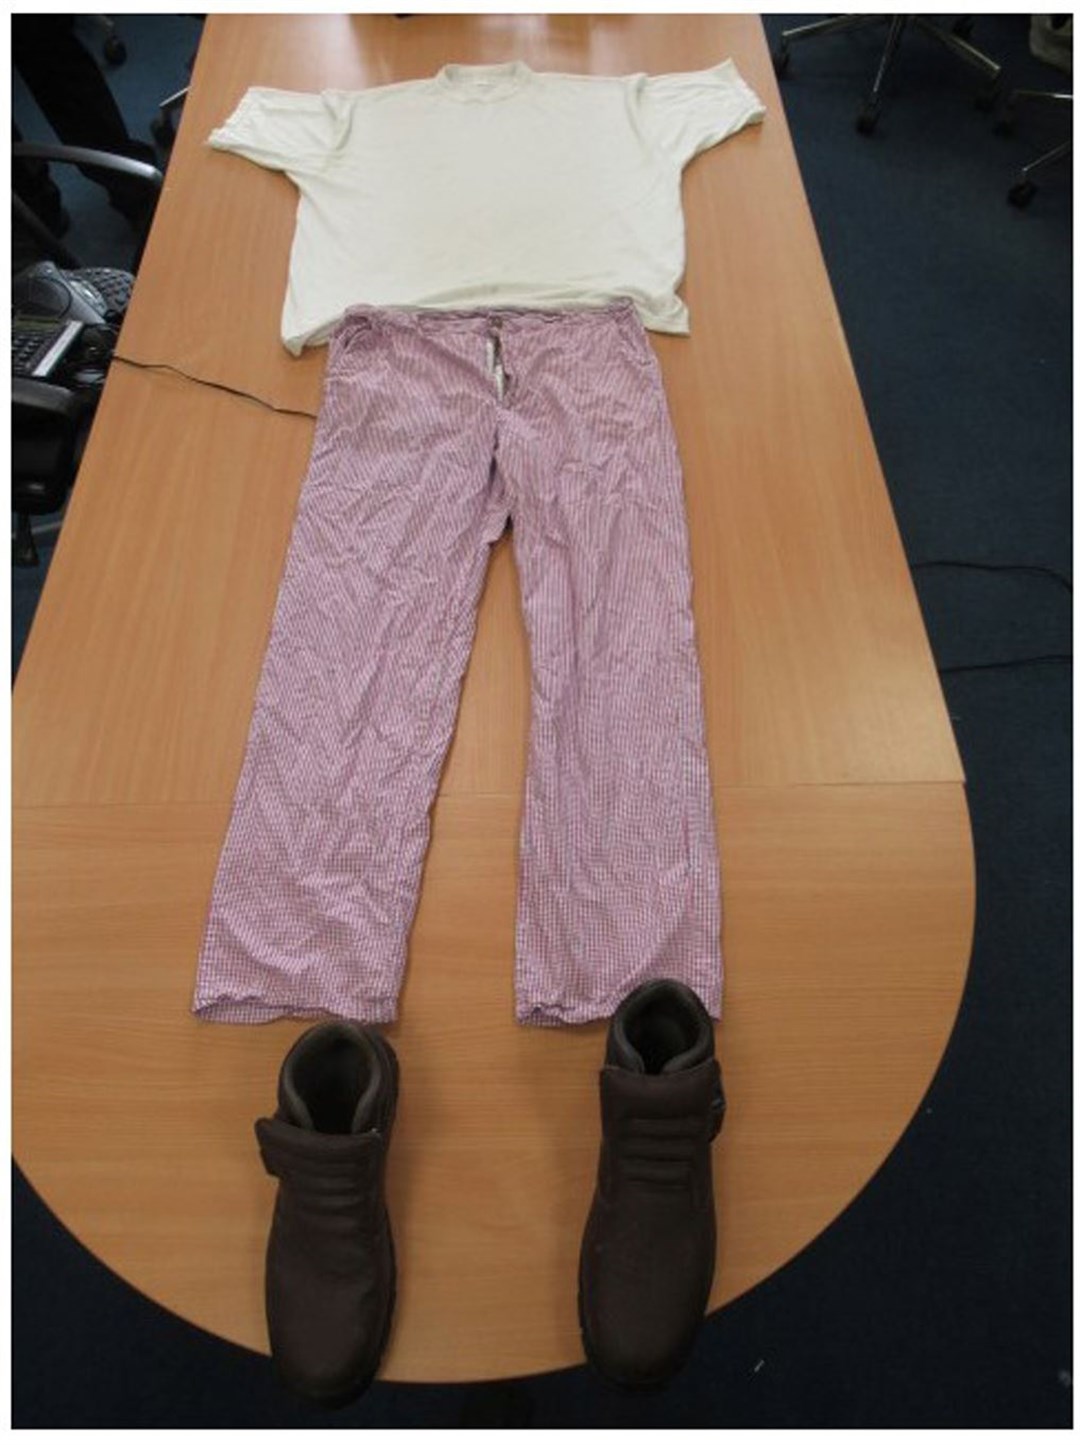 Police handout of the chef’s clothing and footwear that Daniel Khalife was wearing following his escape from HMP Wandsworth (Met Police/PA)